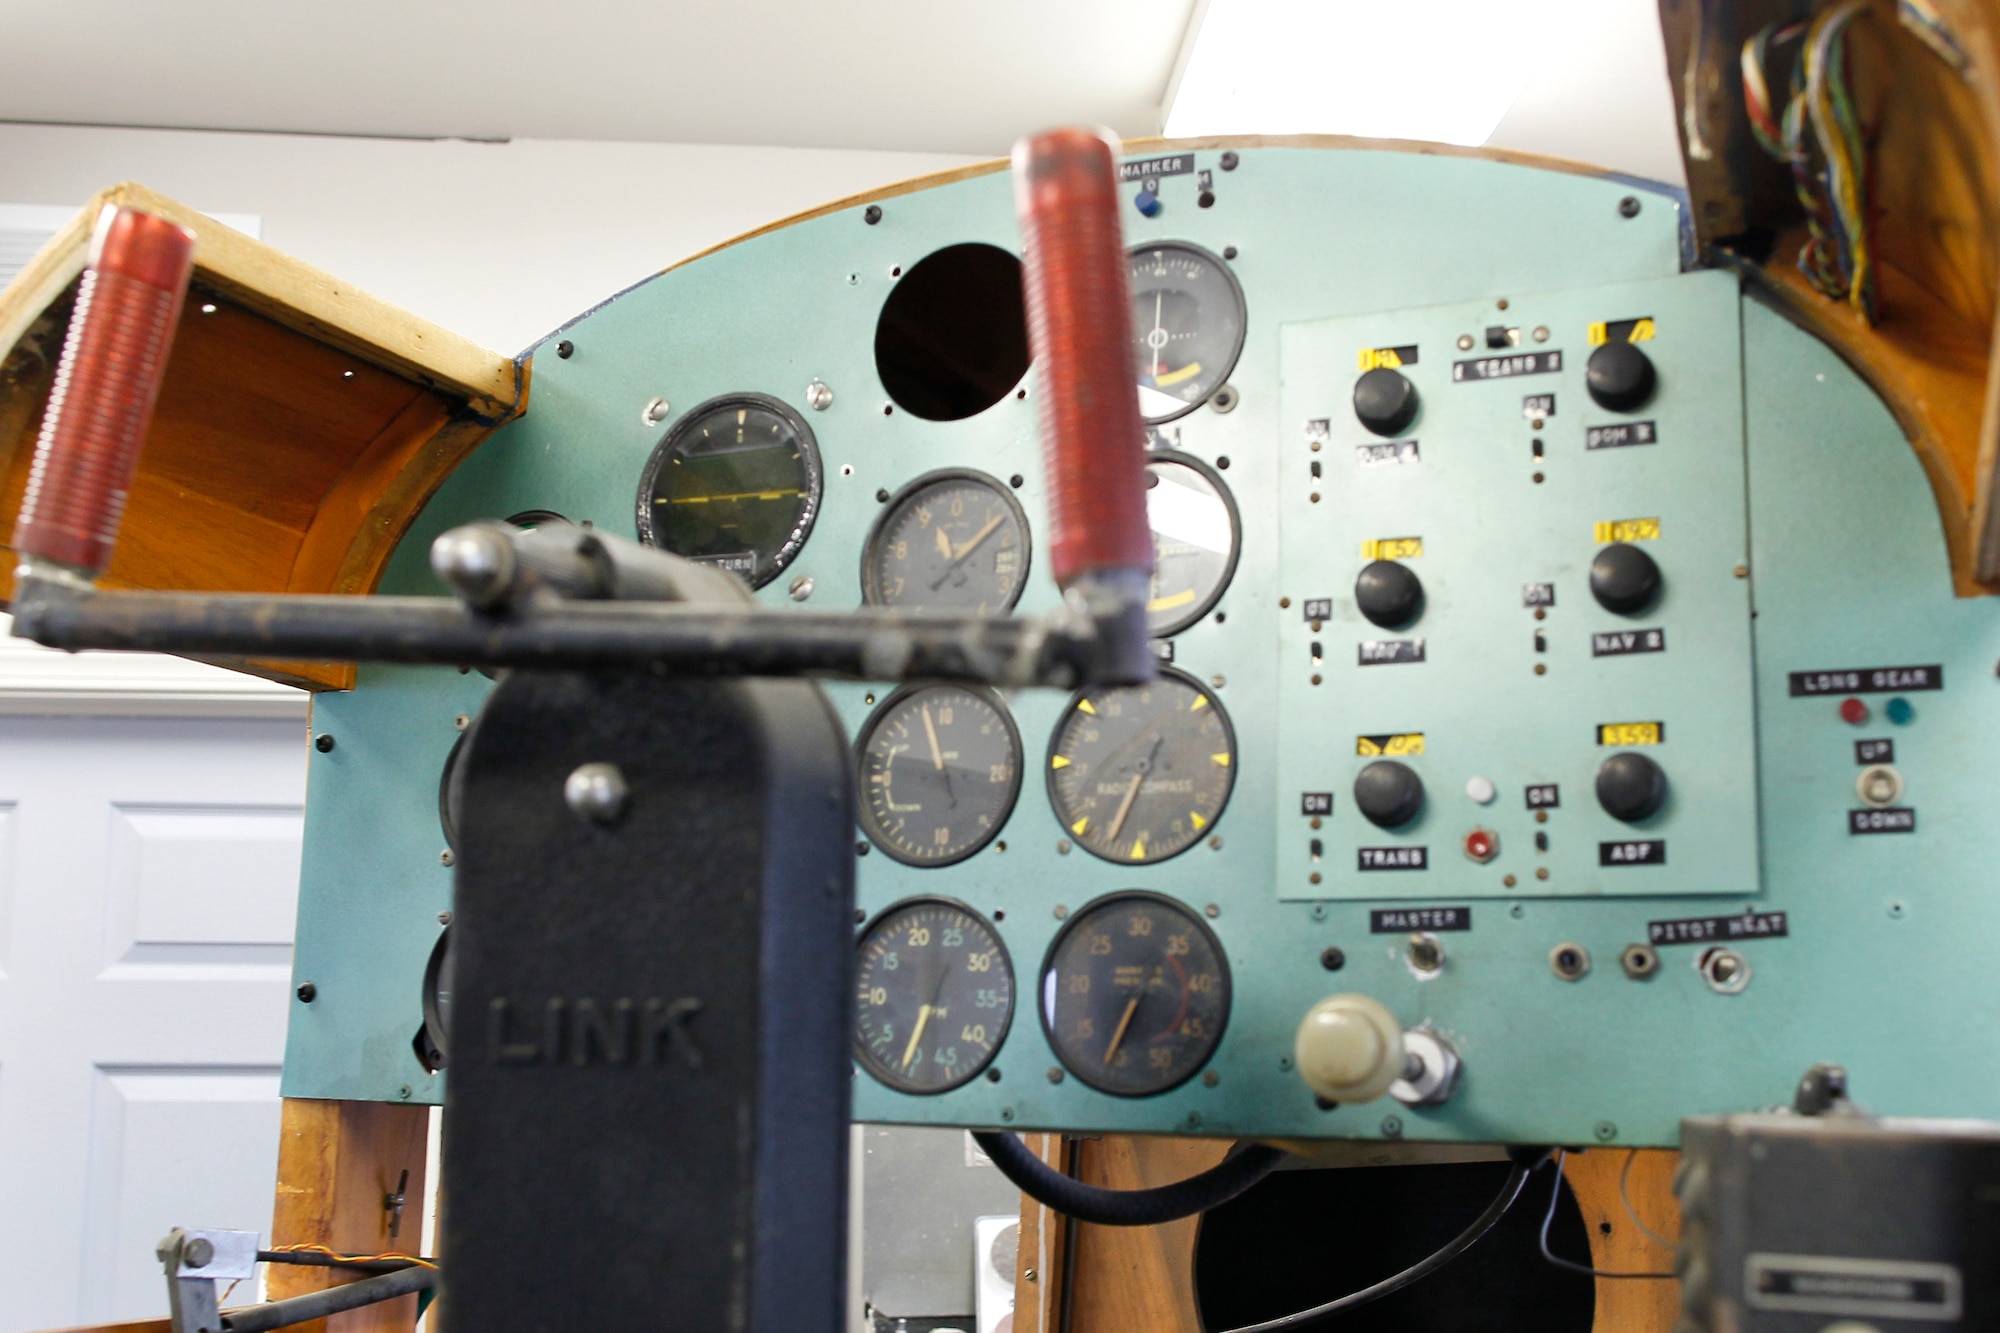 The control panel of a World War II-era Link Trainer is being restored for display at the Selfridge Military Air Museum, March 10, 2011. Museum volunteers are working on restoring the trainer, used extensively by the U.S. military in the 1930s-50s. (U.S. Air Force photo by MSgt. Terry Atwell)(RELEASED)